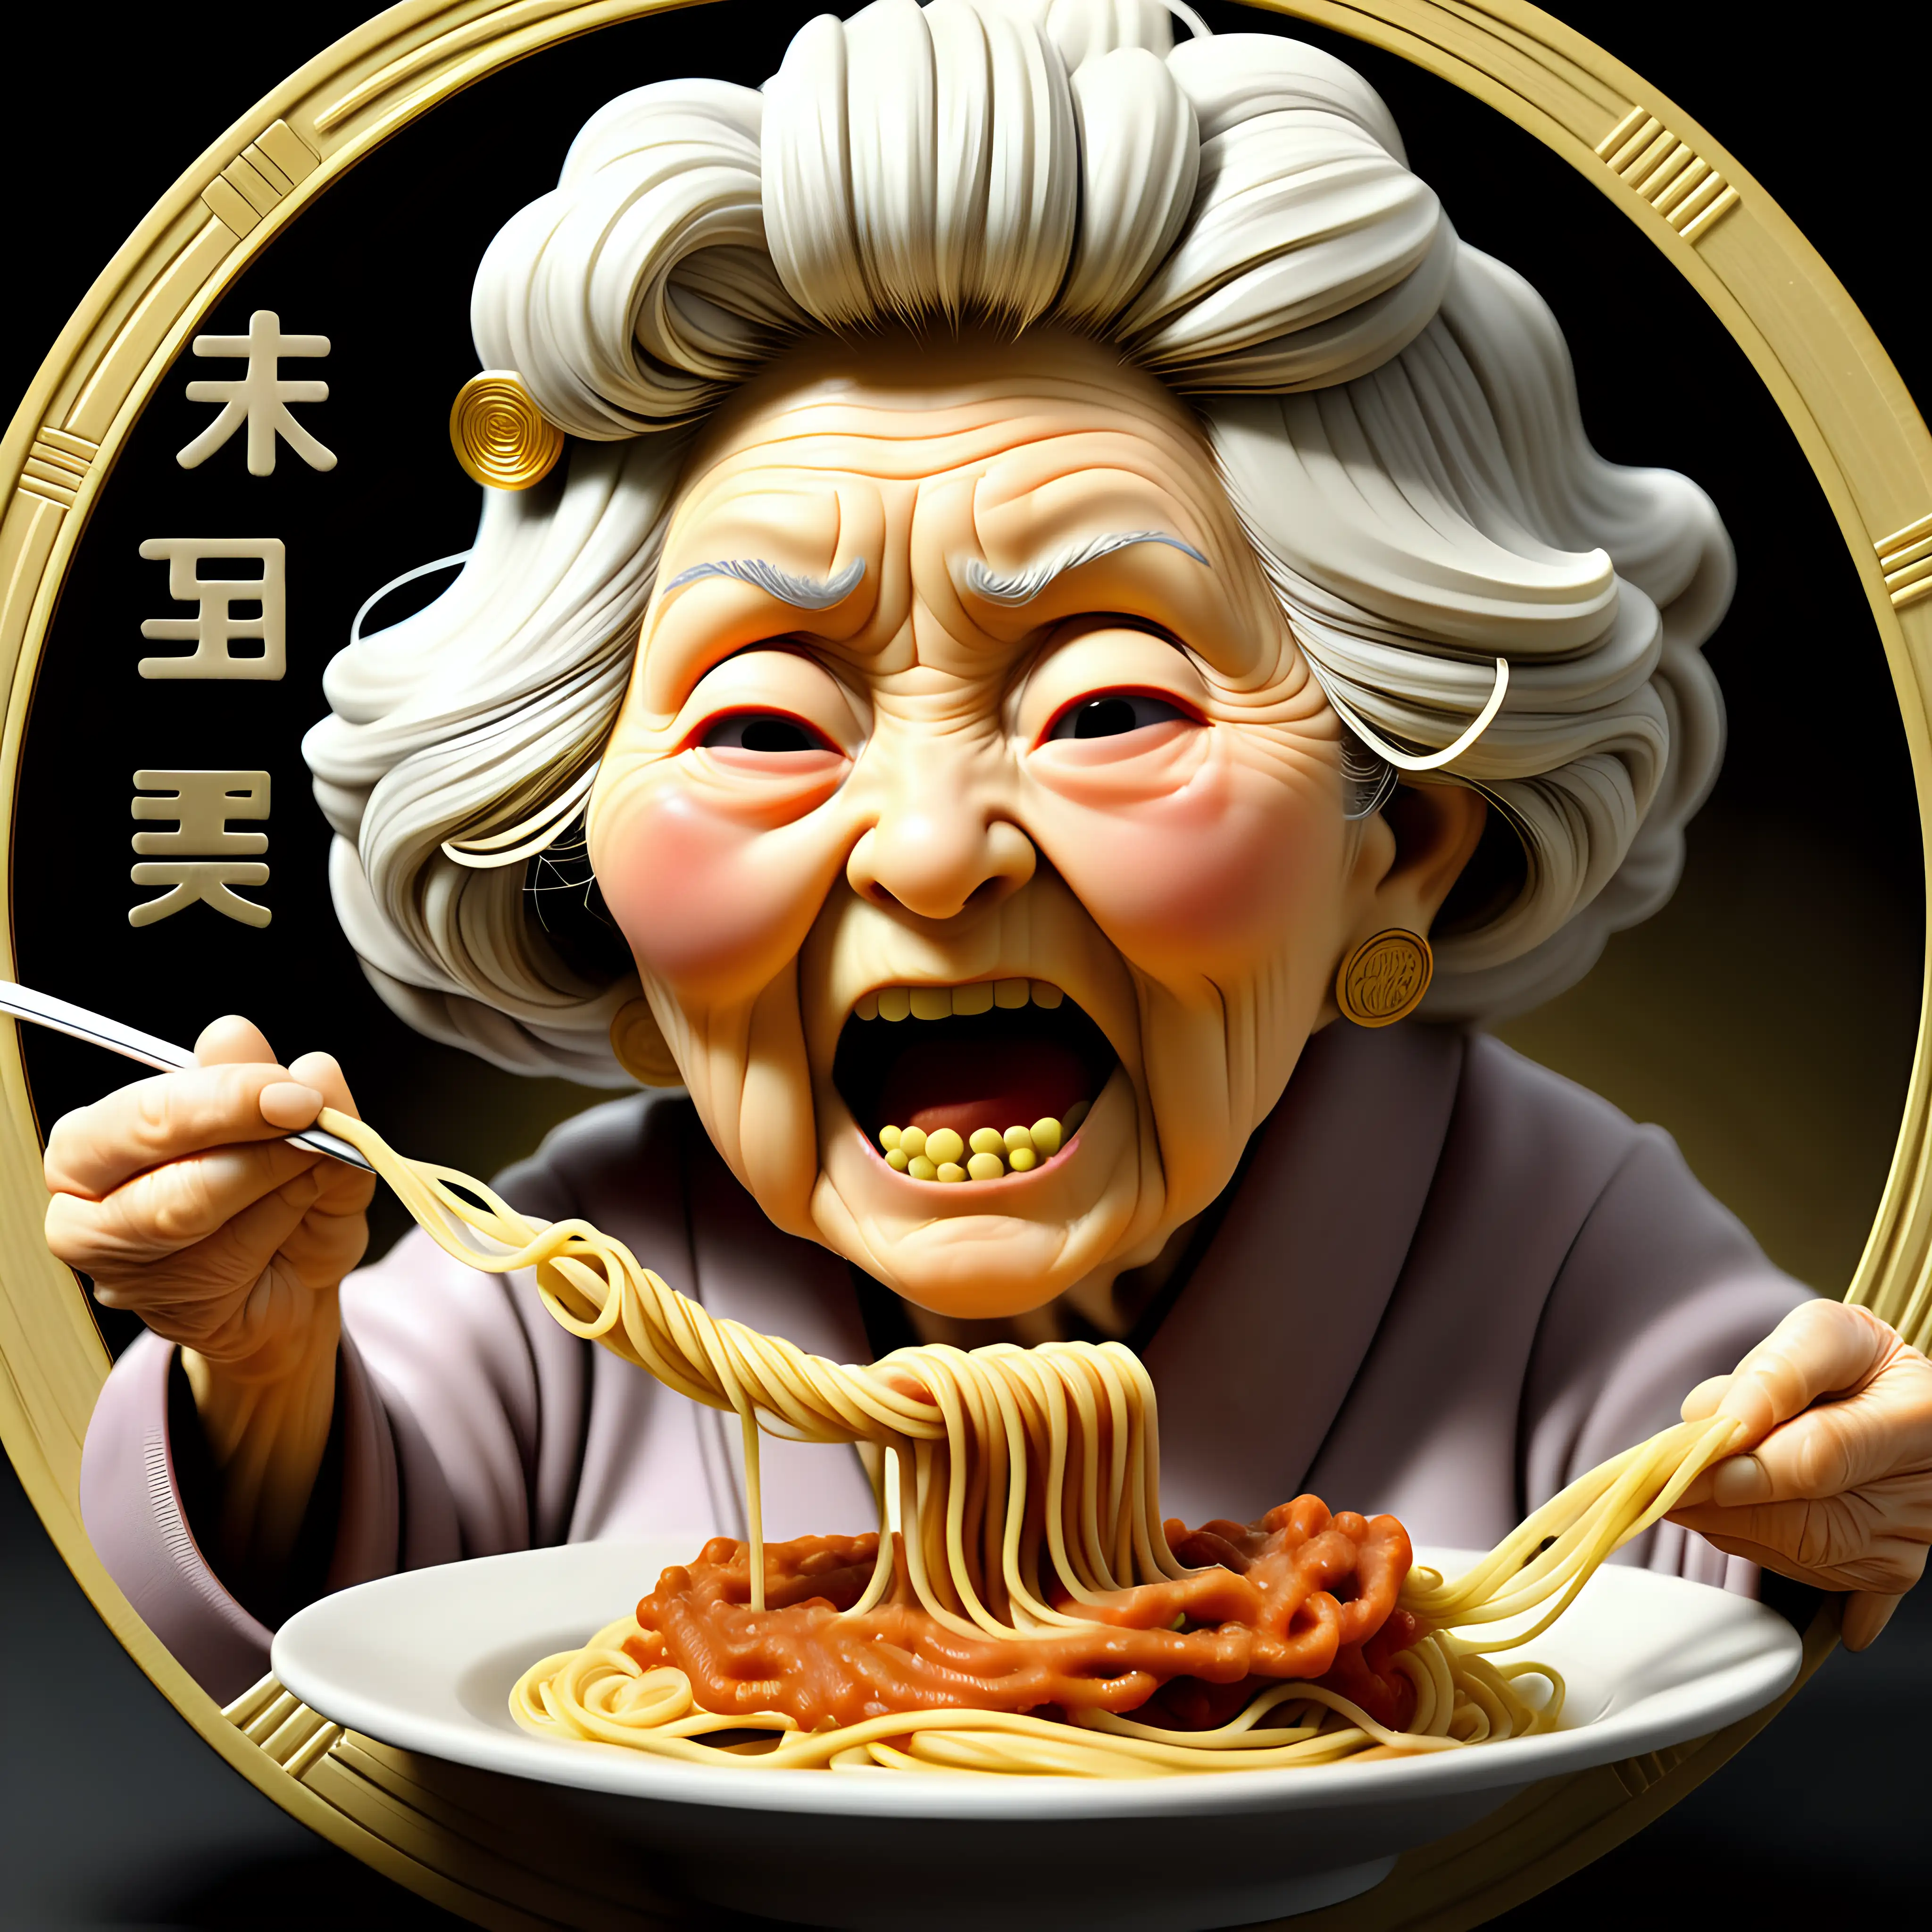 a gold coin with a japanese grandma eating spaghetti with the word at the bottom display "Mom's Spaghetti"